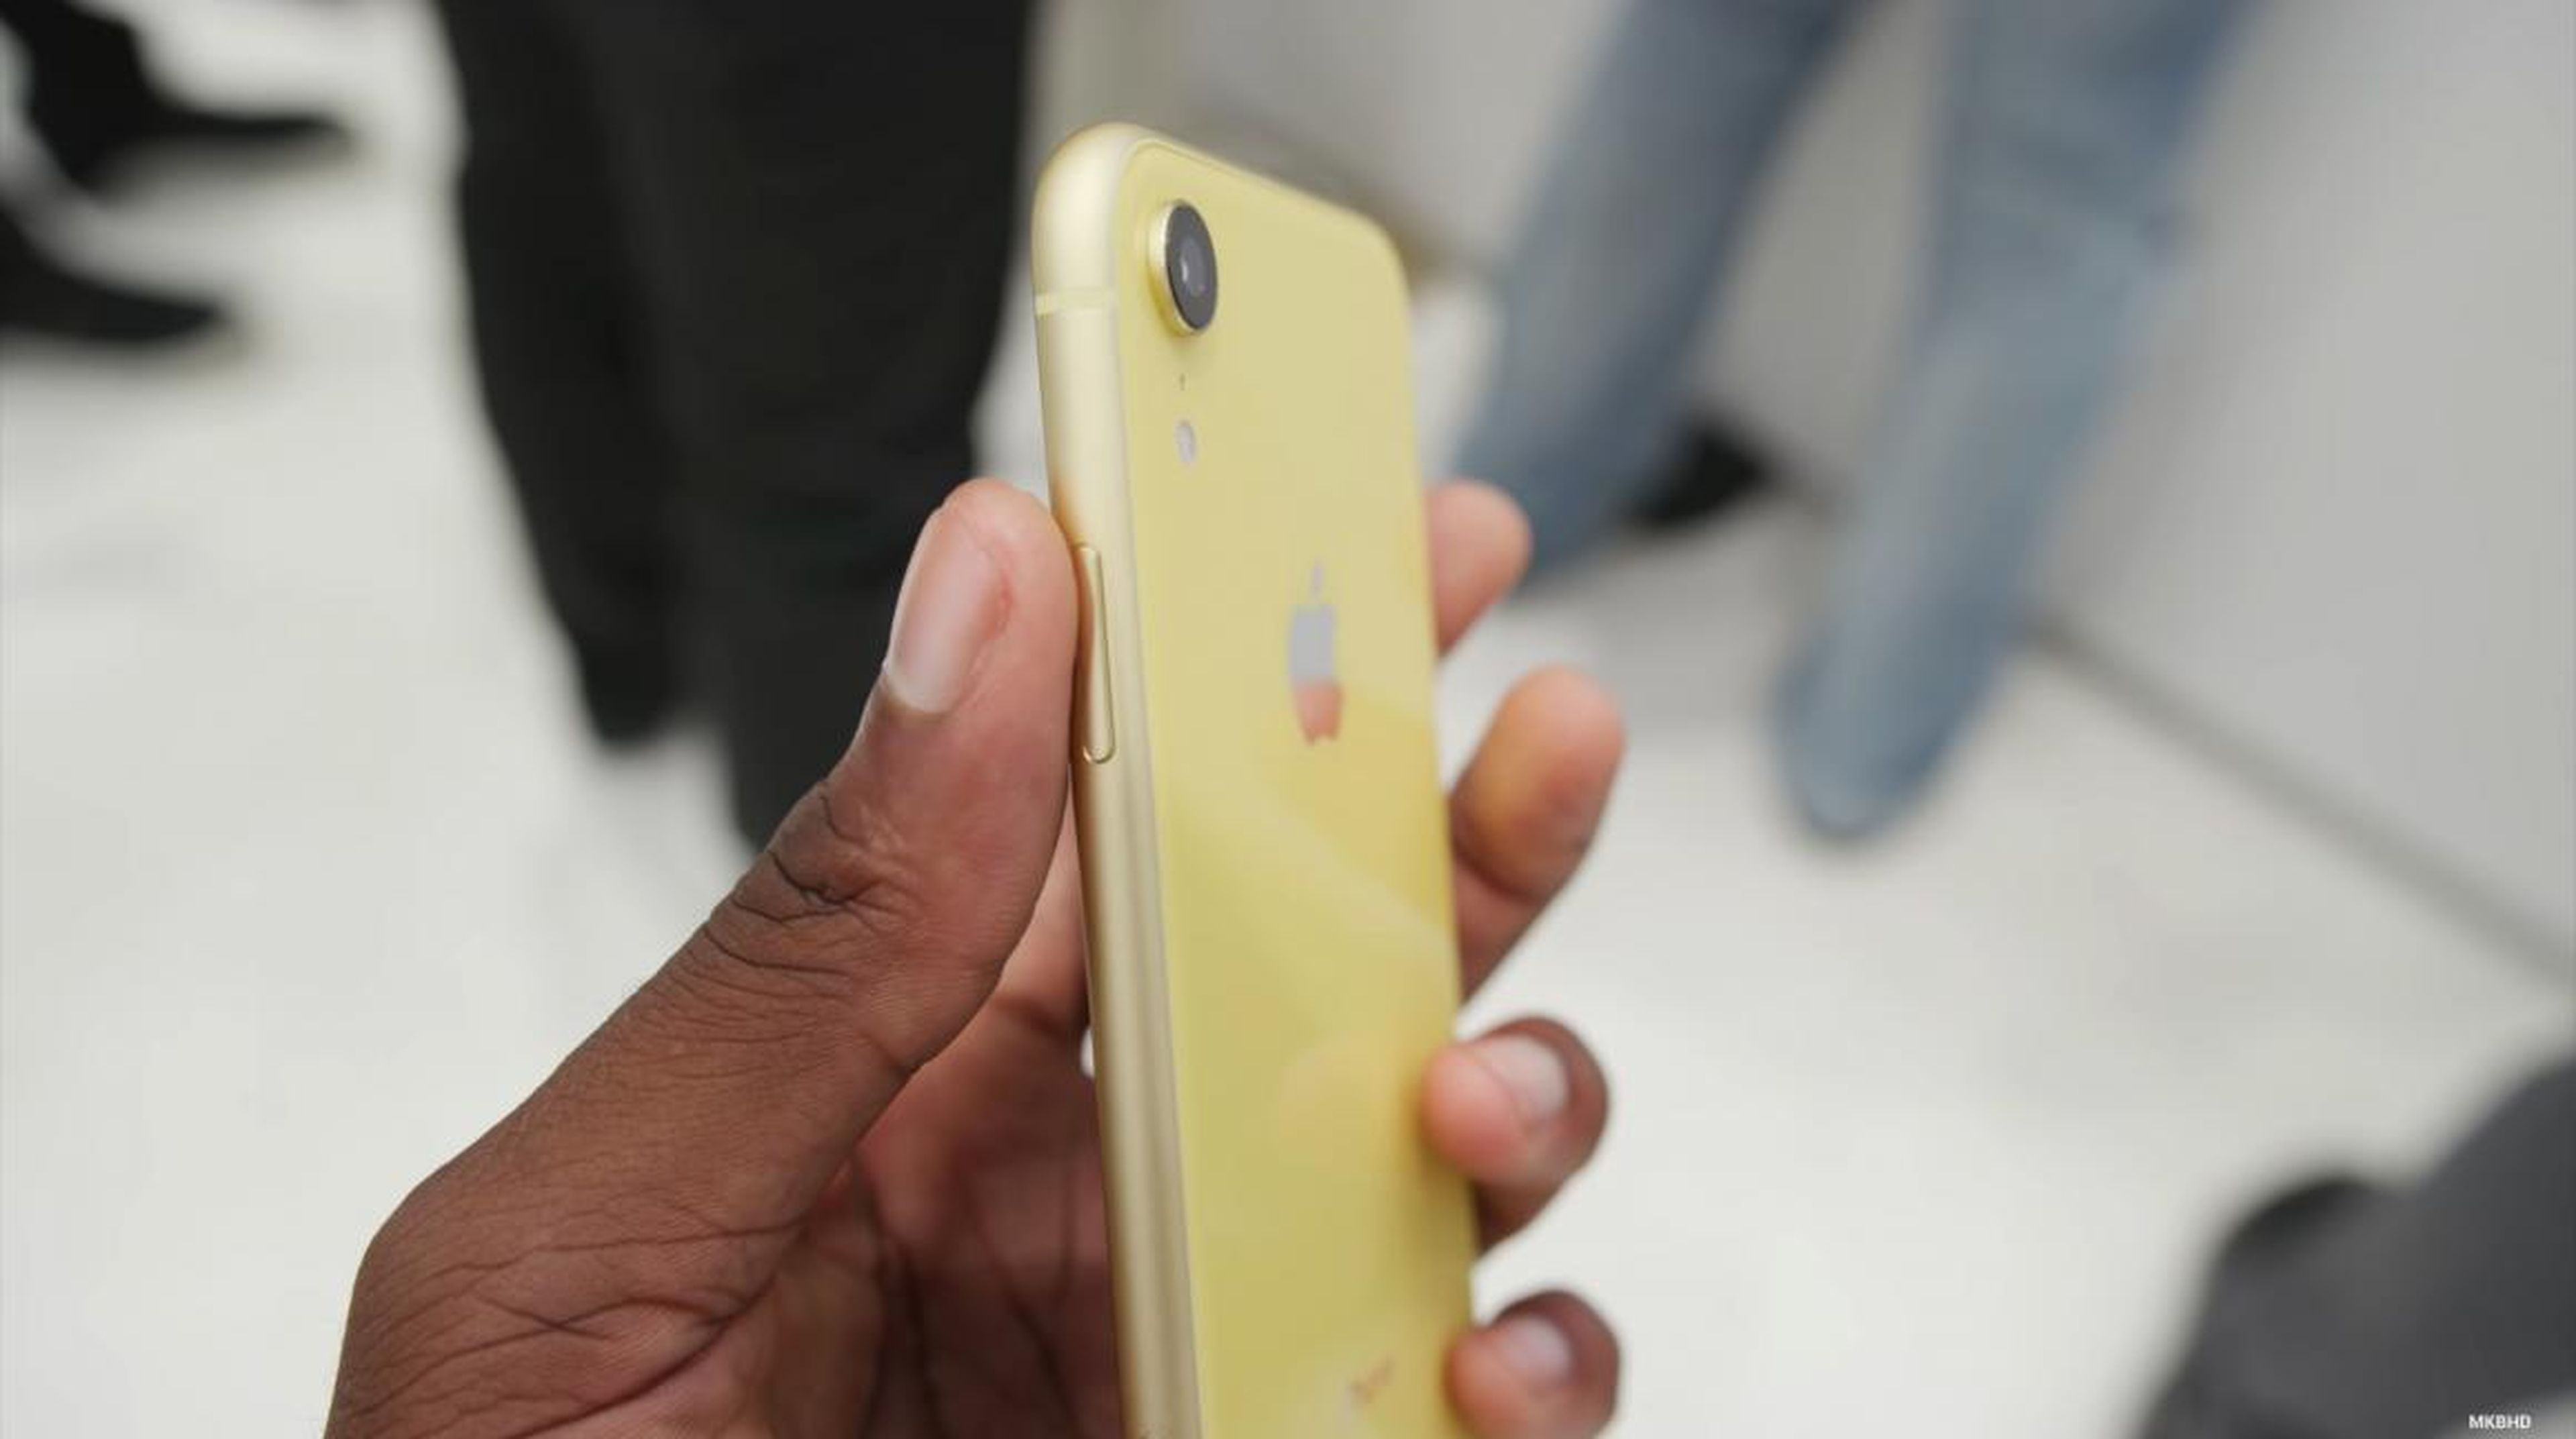 From an angle, you can see the metal edges again have a slightly different color — it almost looks golden.